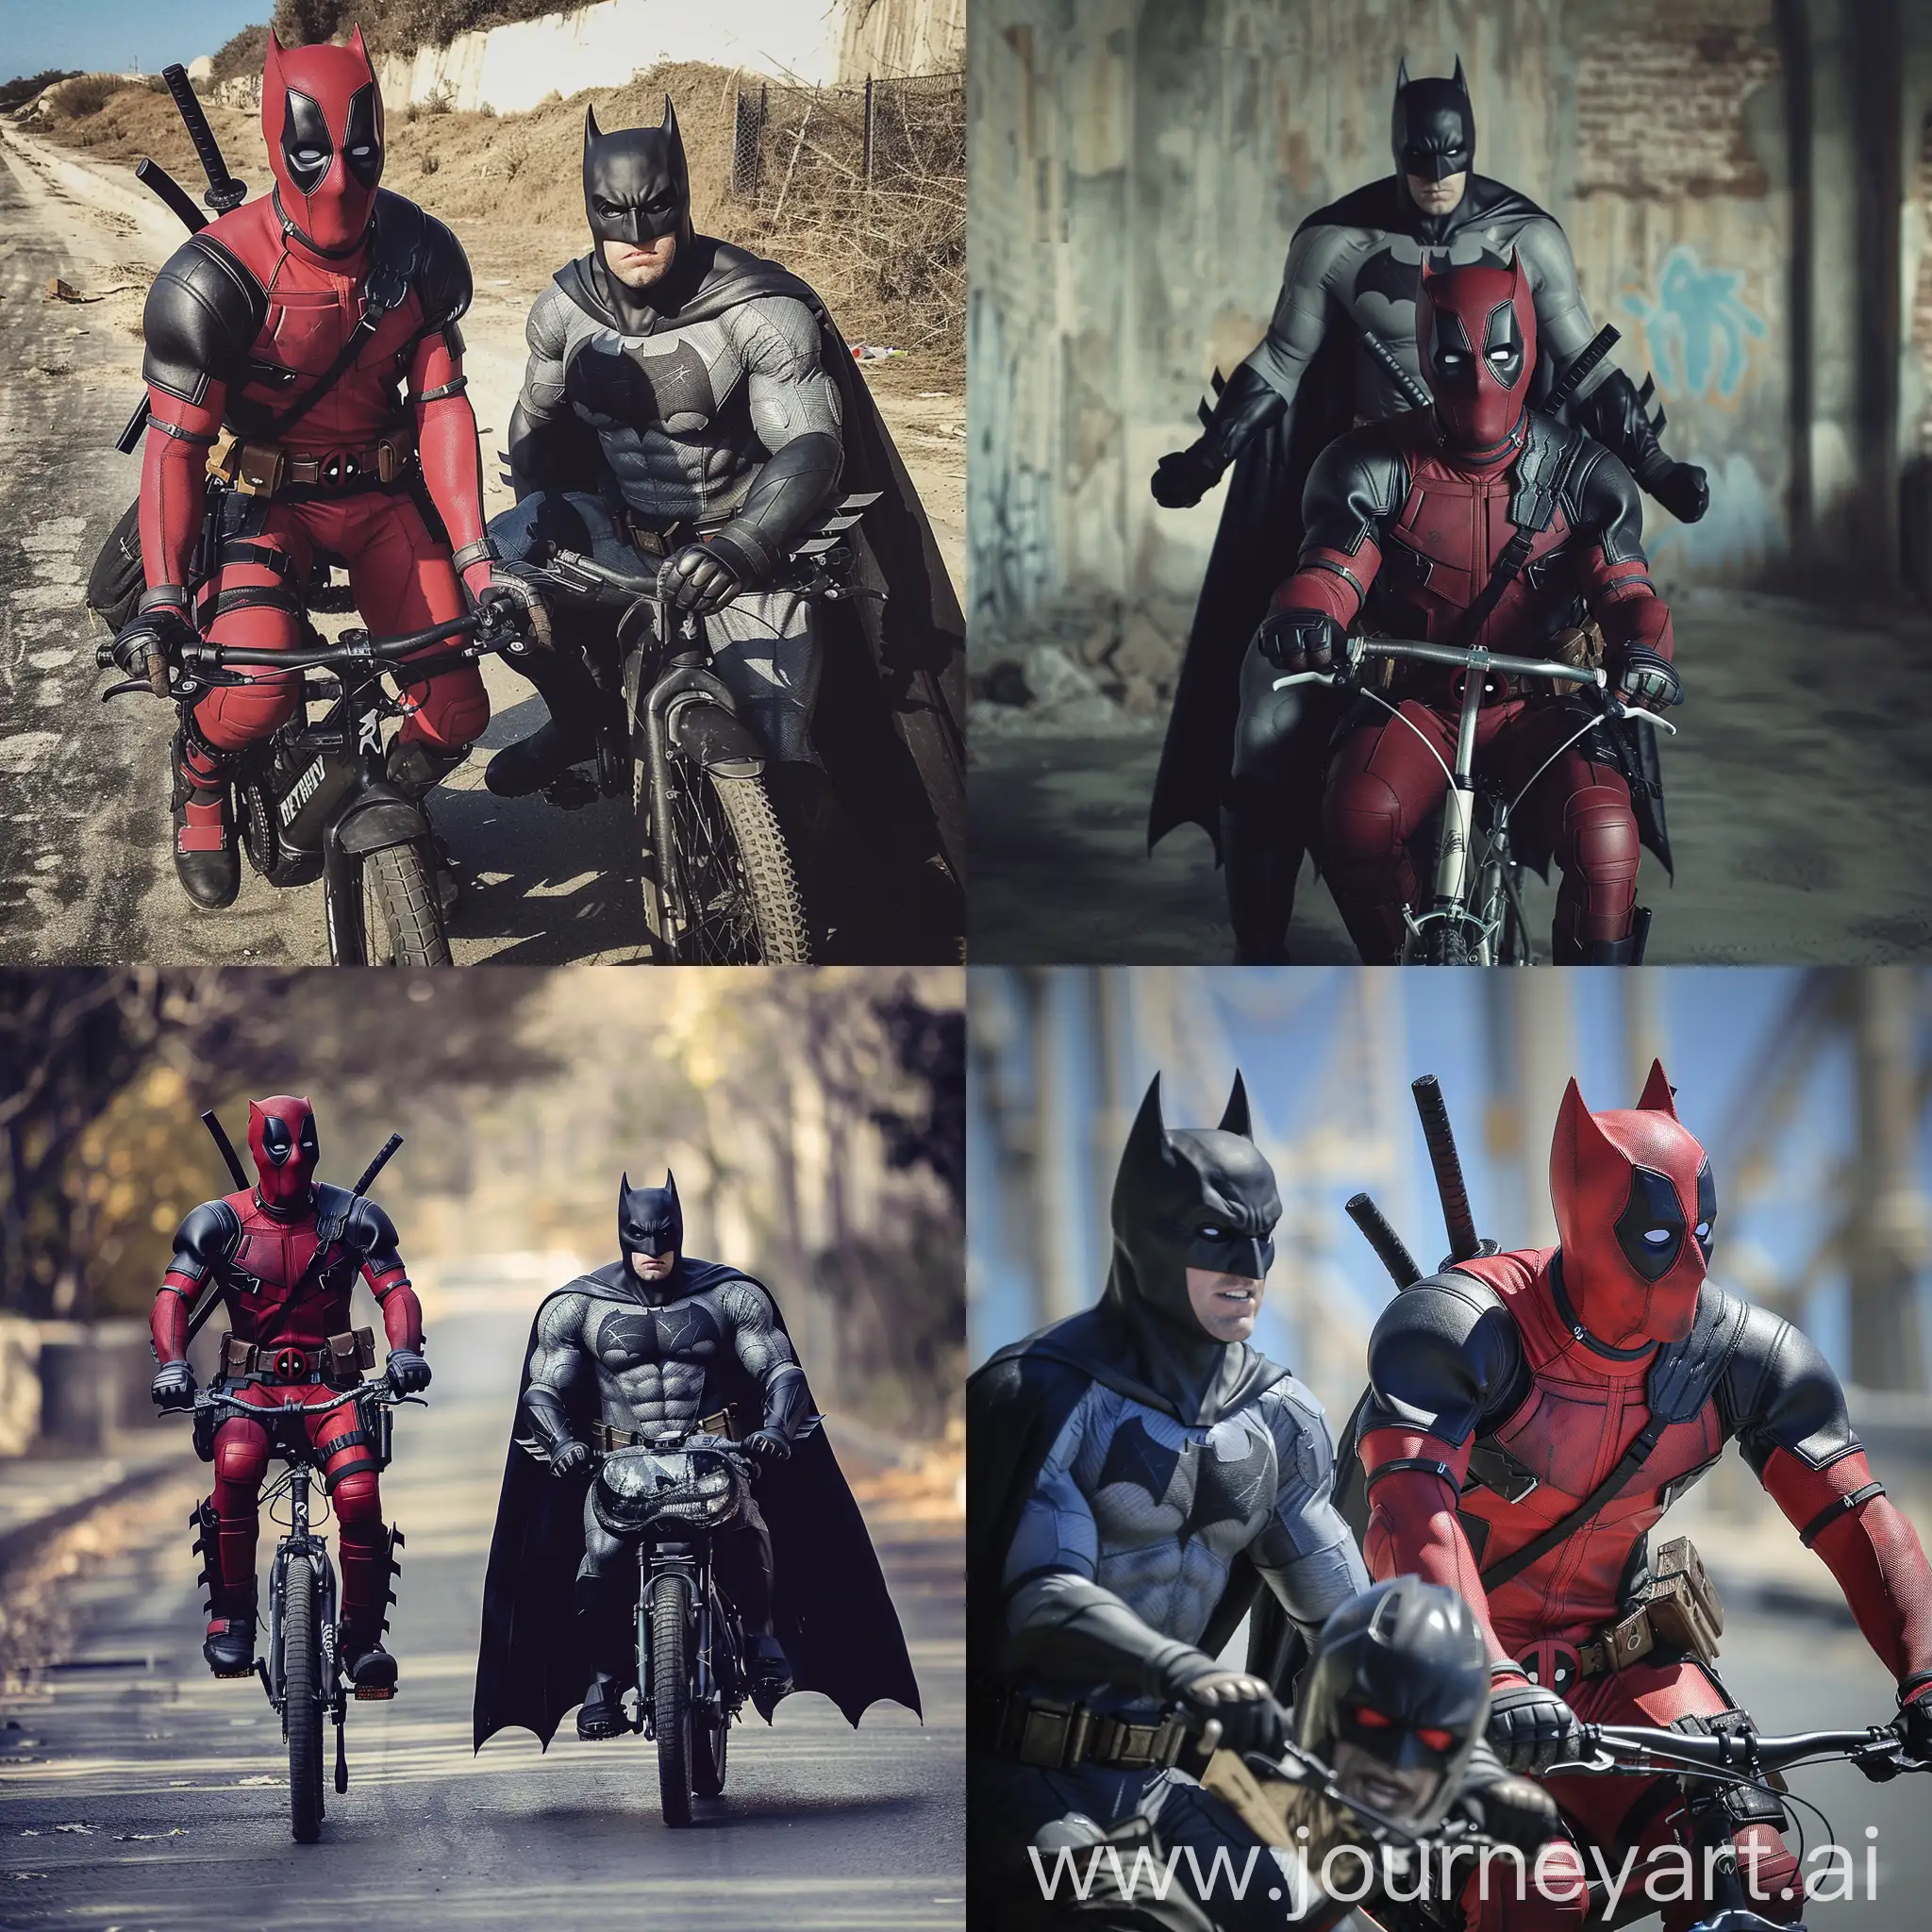 Deadpool-and-Batman-Riding-Motorcycle-Together-in-Urban-Setting